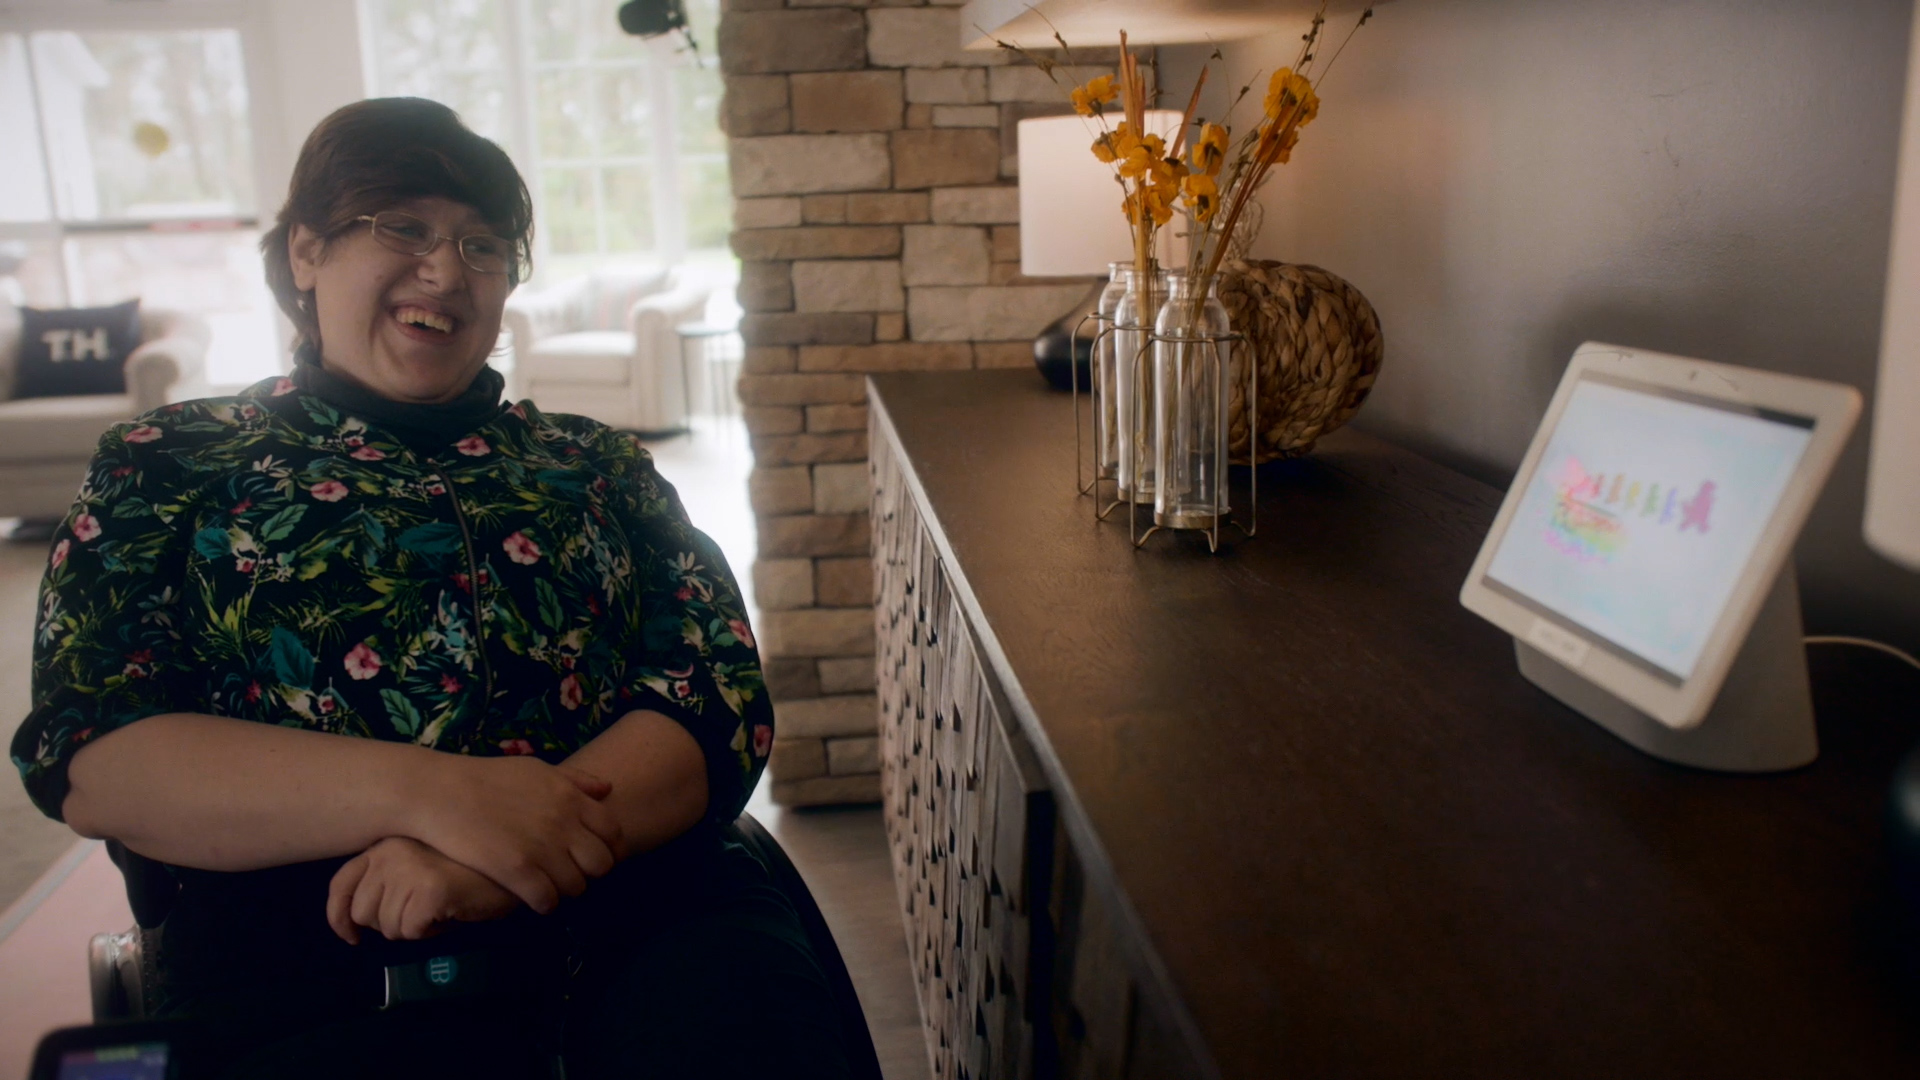 Champions Place Resident laughs in front of a Google Nest Hub screen placed on a table